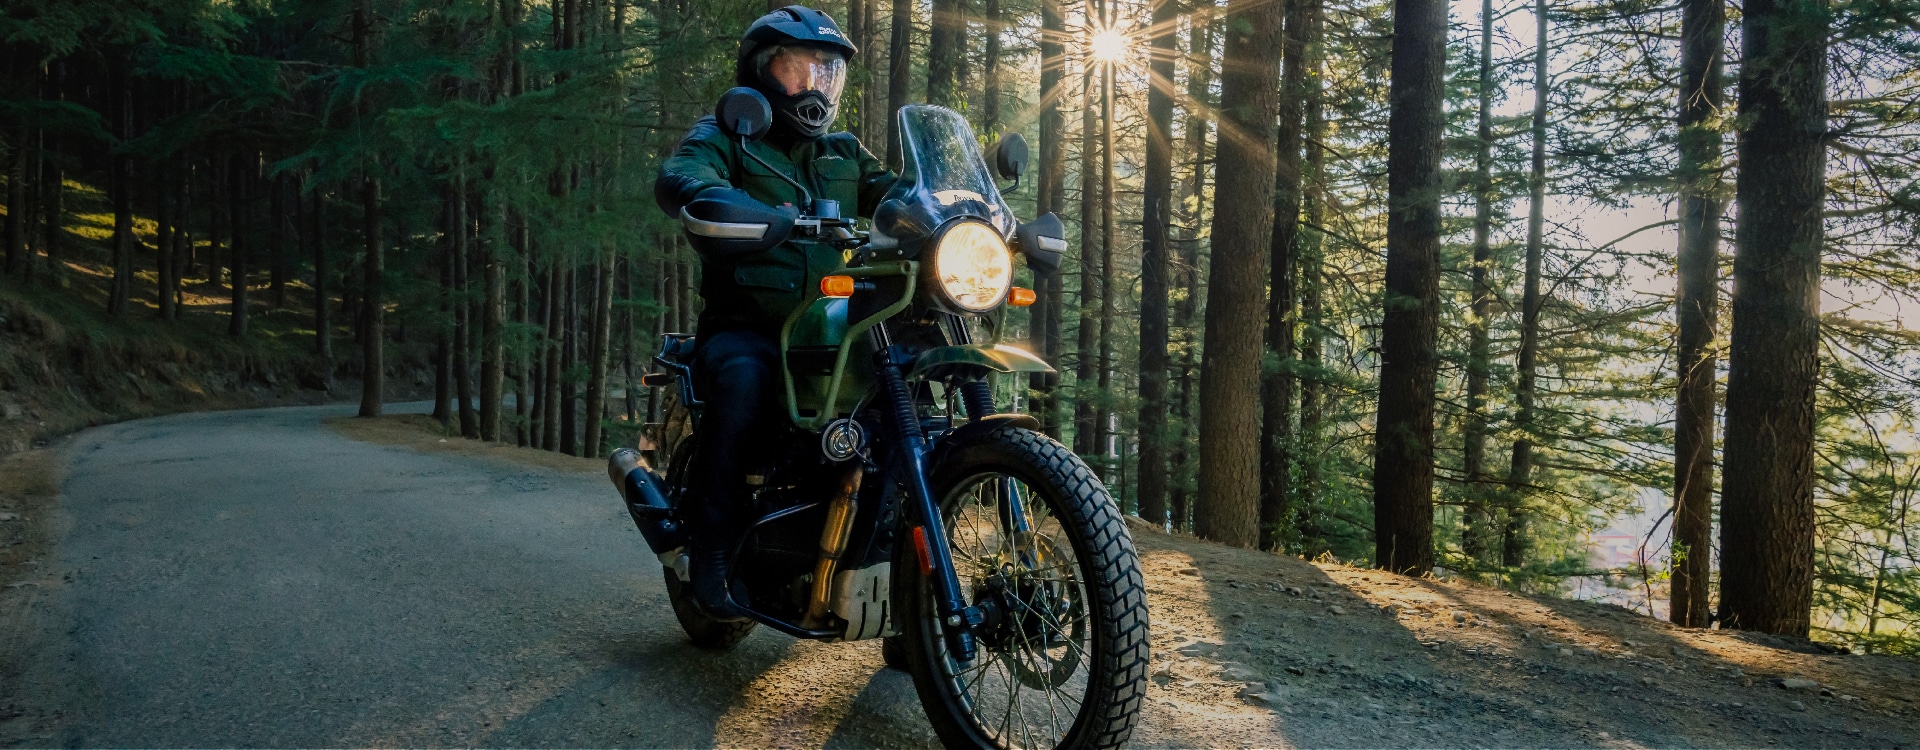 Himalayan 410 For a Steadfast Ride